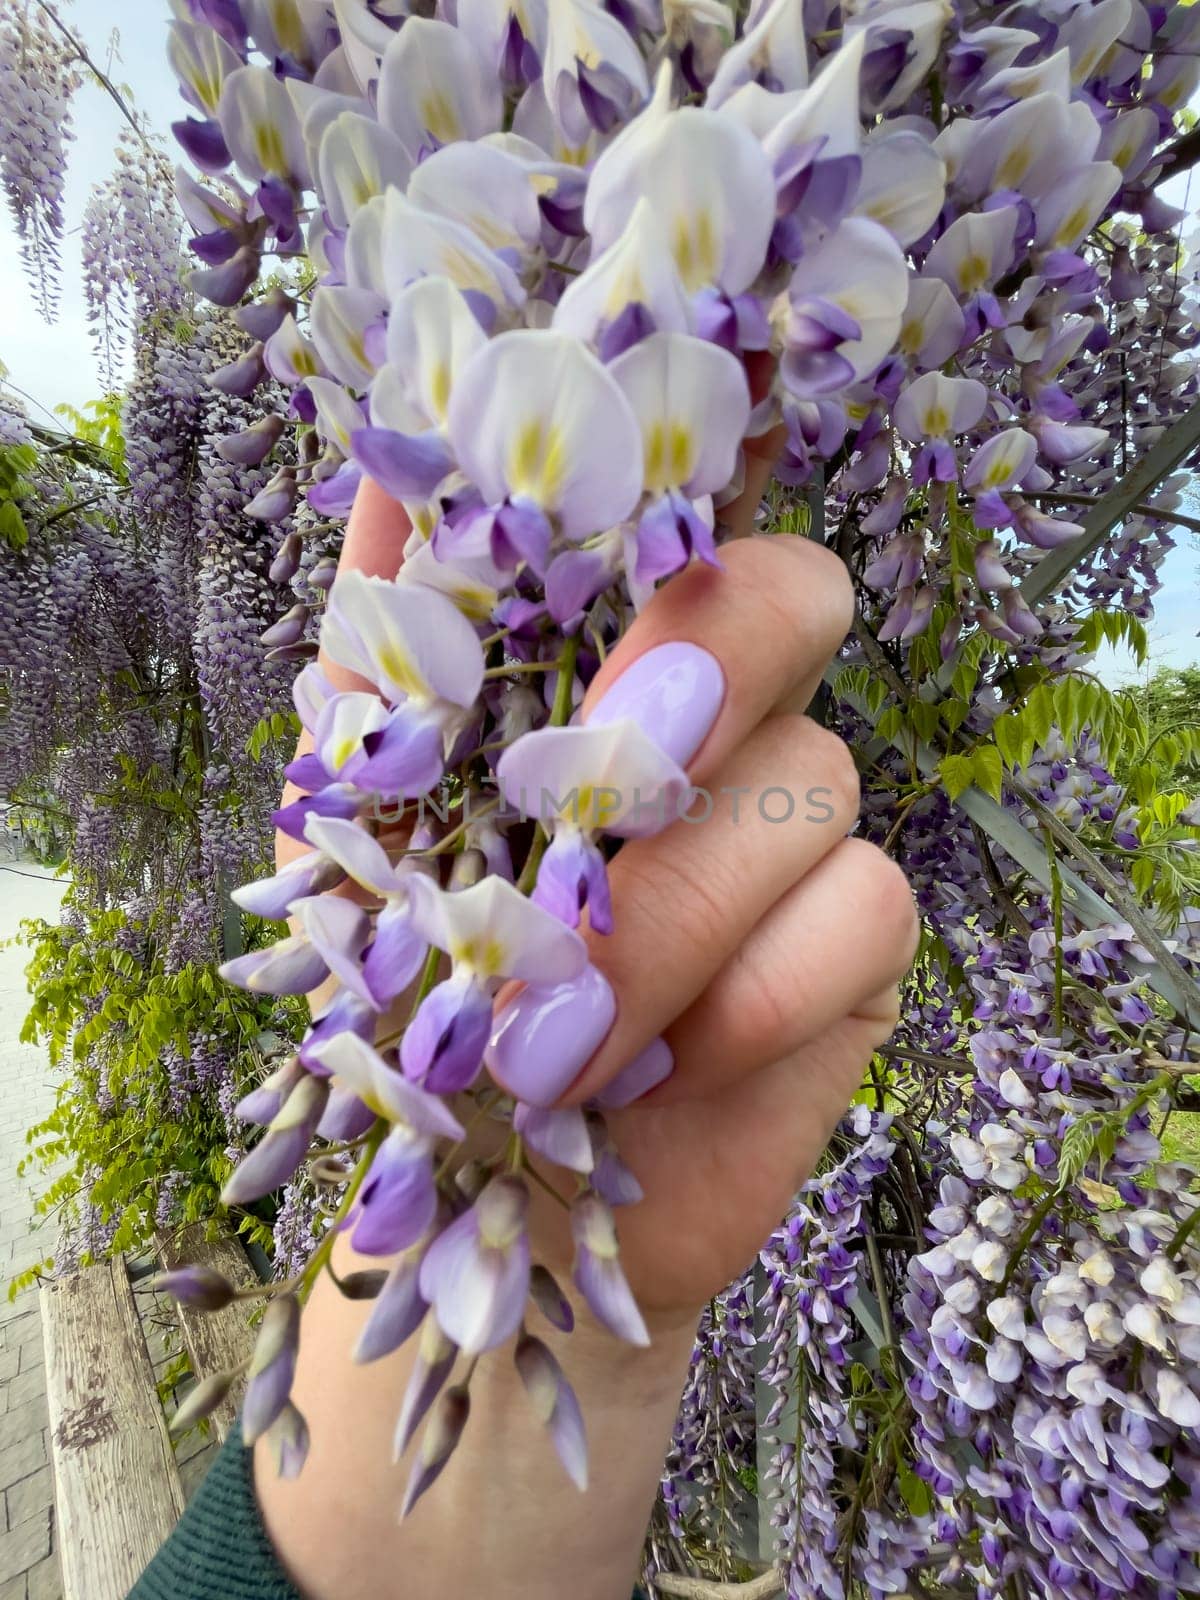 Blooming Wisteria Sinensis with scented classic purple flowersin full bloom in hanging racemes on the wind closeup. Garden with wisteria in spring. by Matiunina